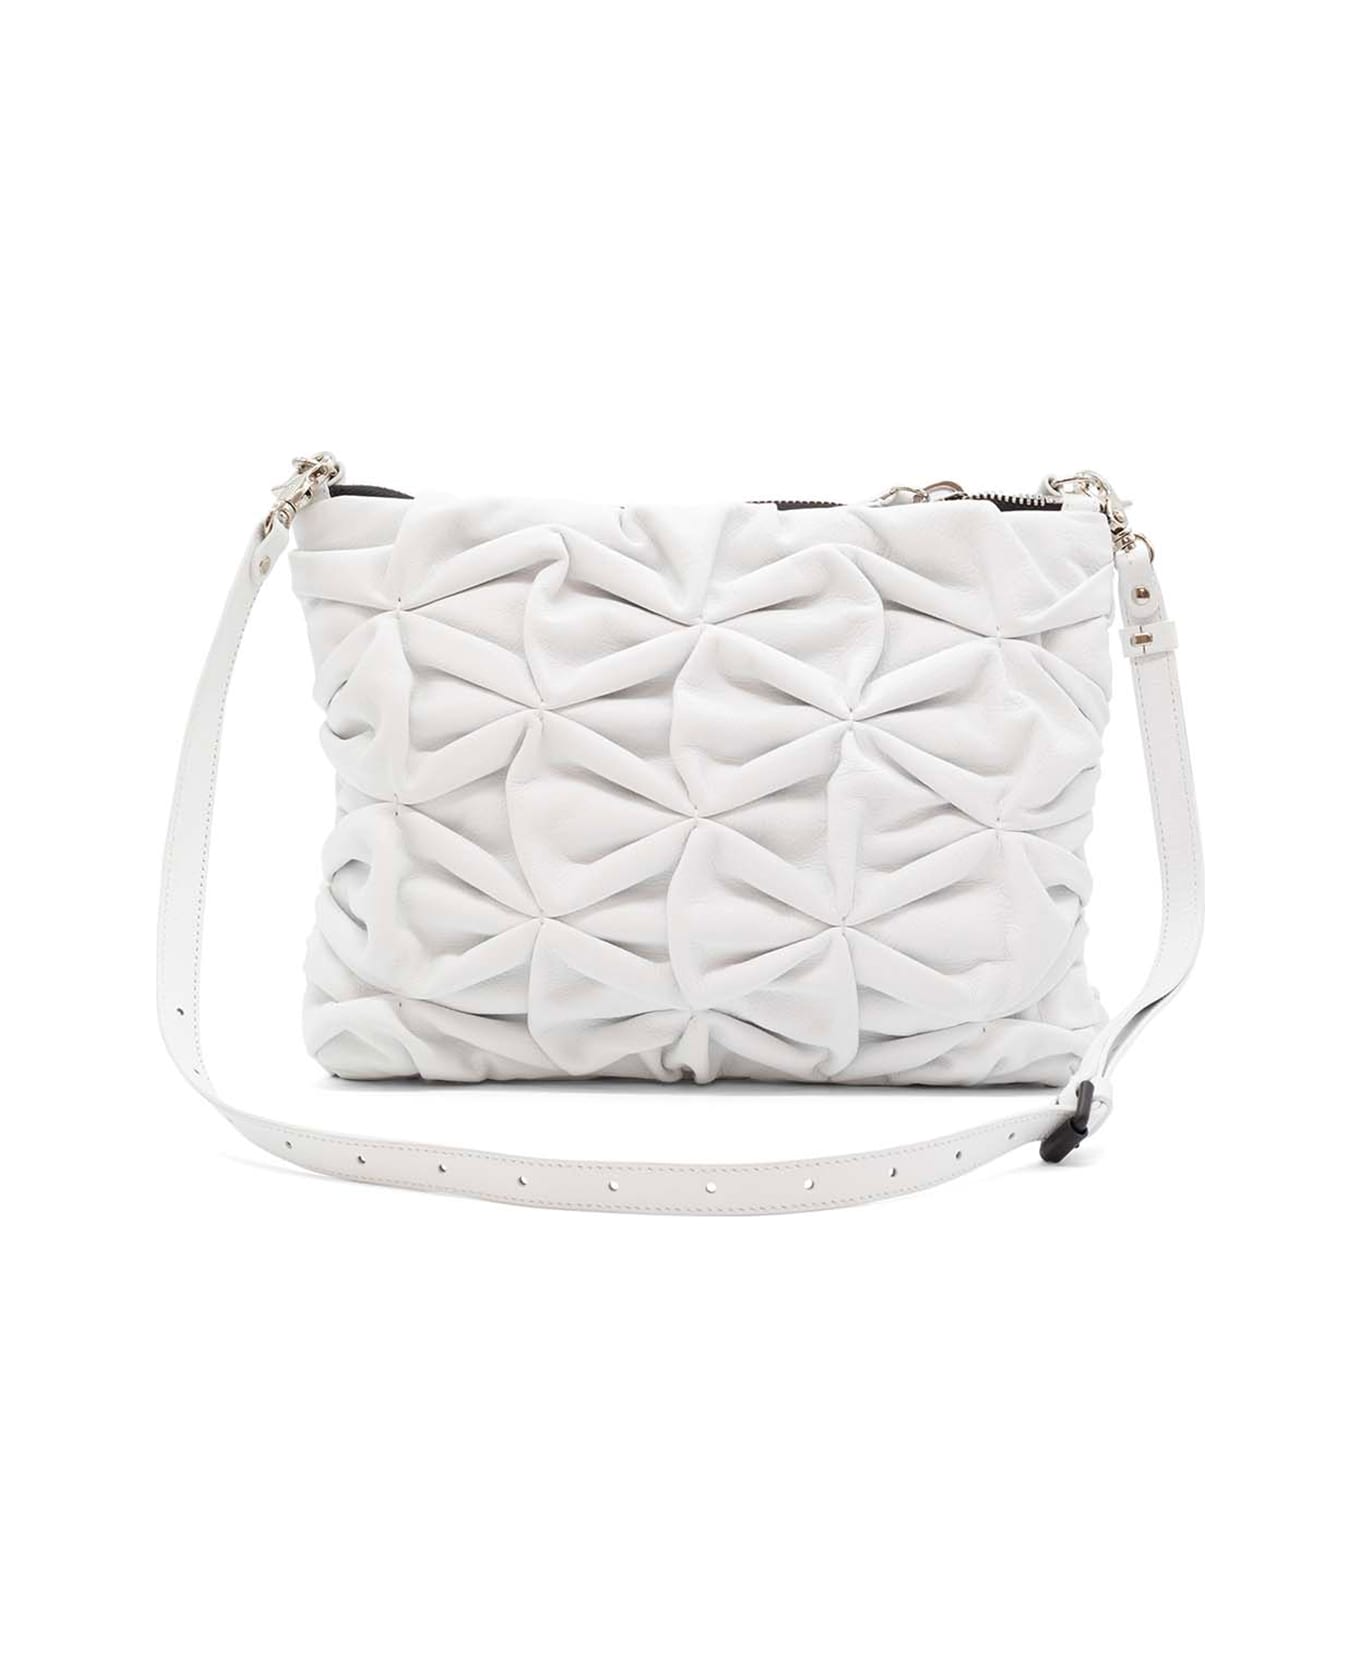 Vic Matié White Leather Bag With Shoulder Strap - WHITE